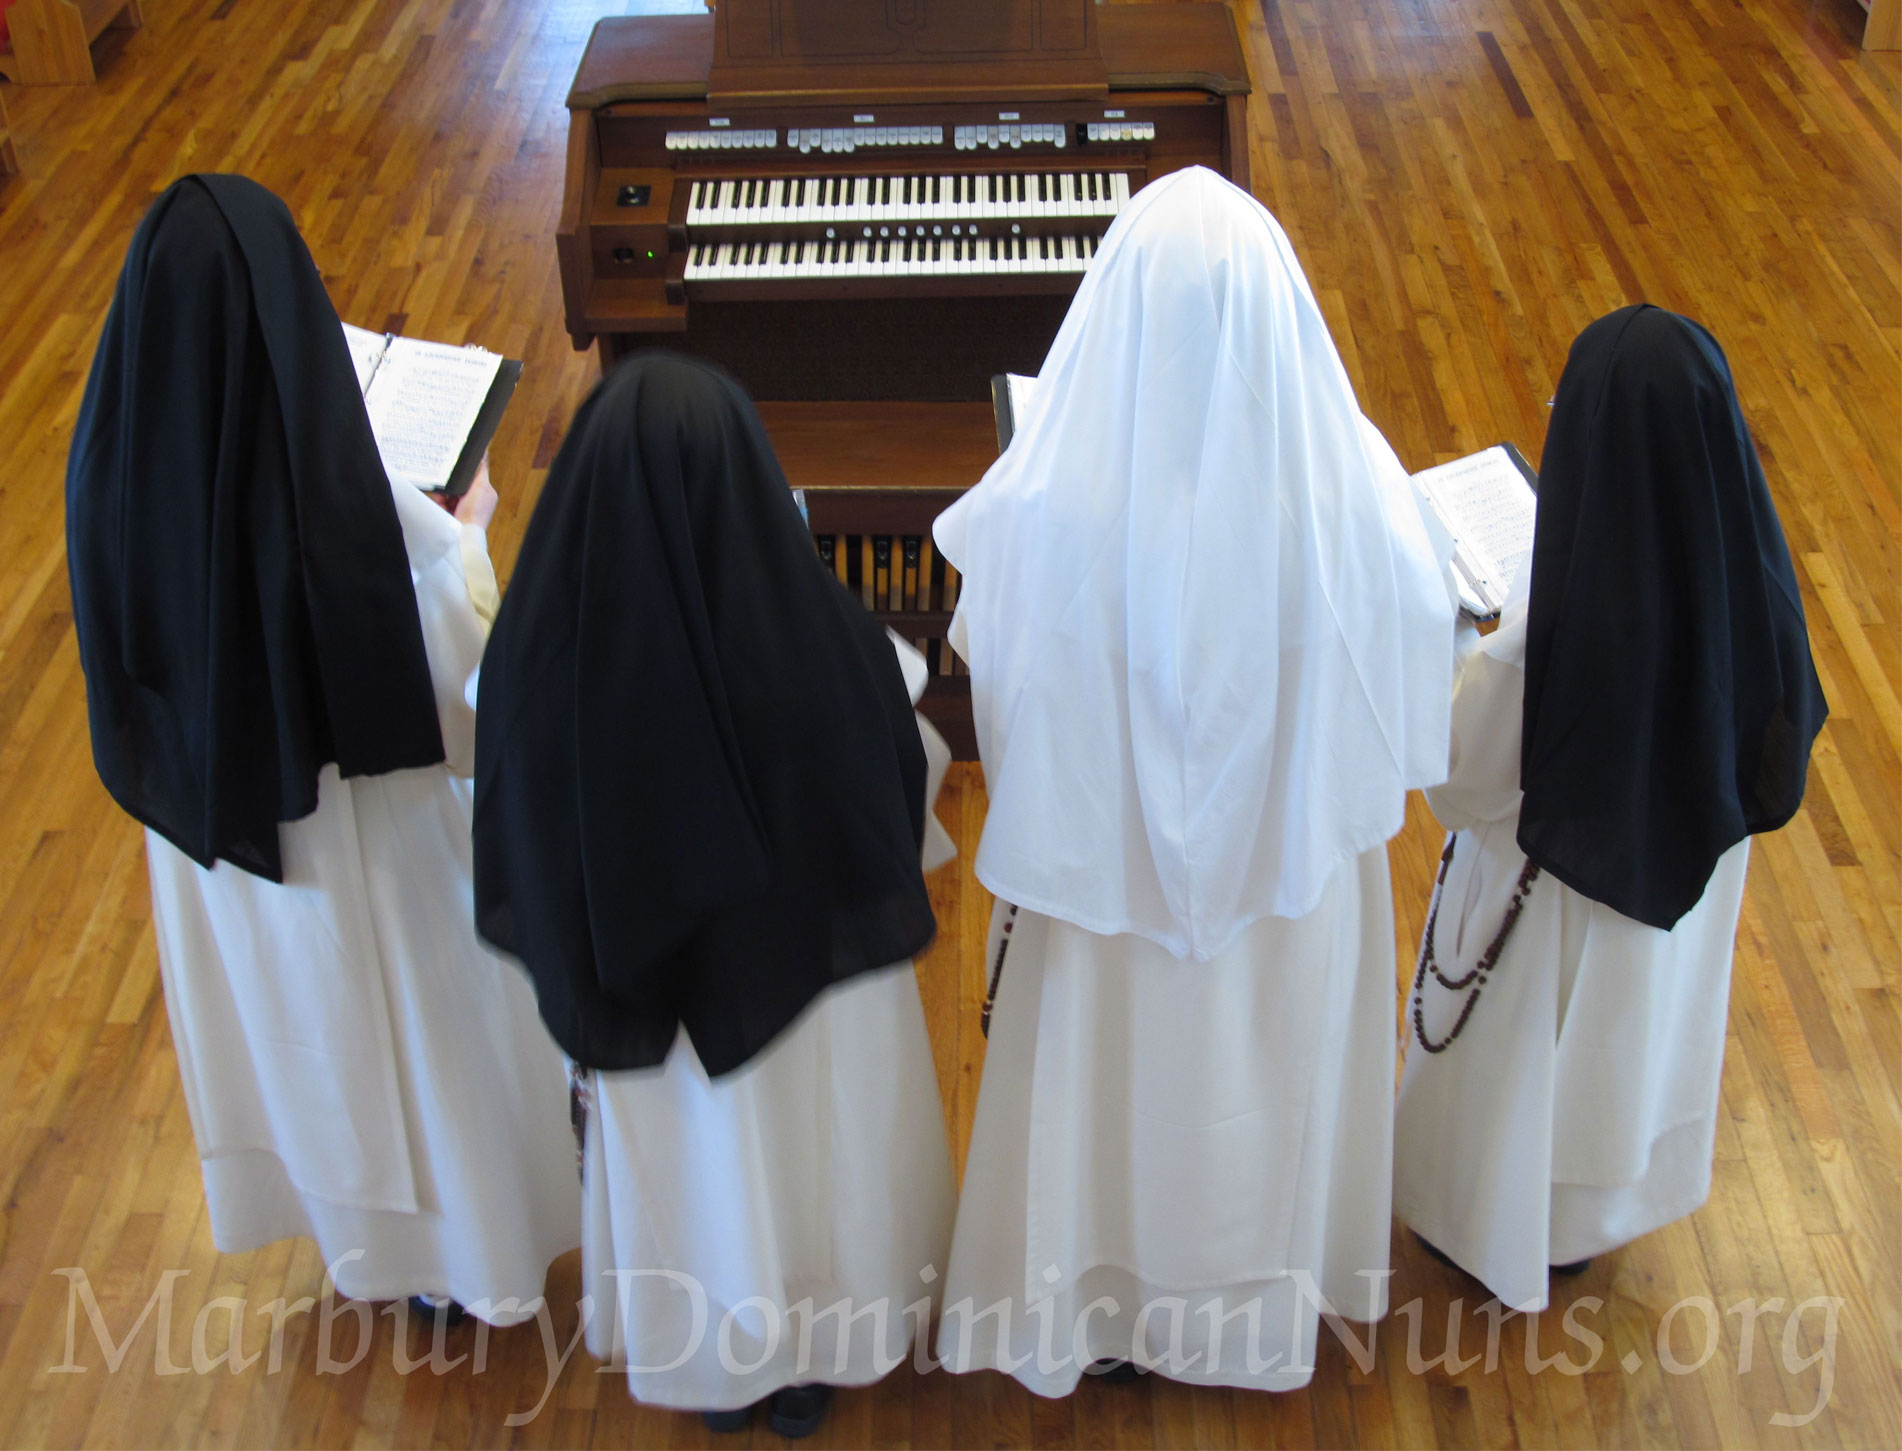 Dominican Nuns sing Dominican Chant at Mass